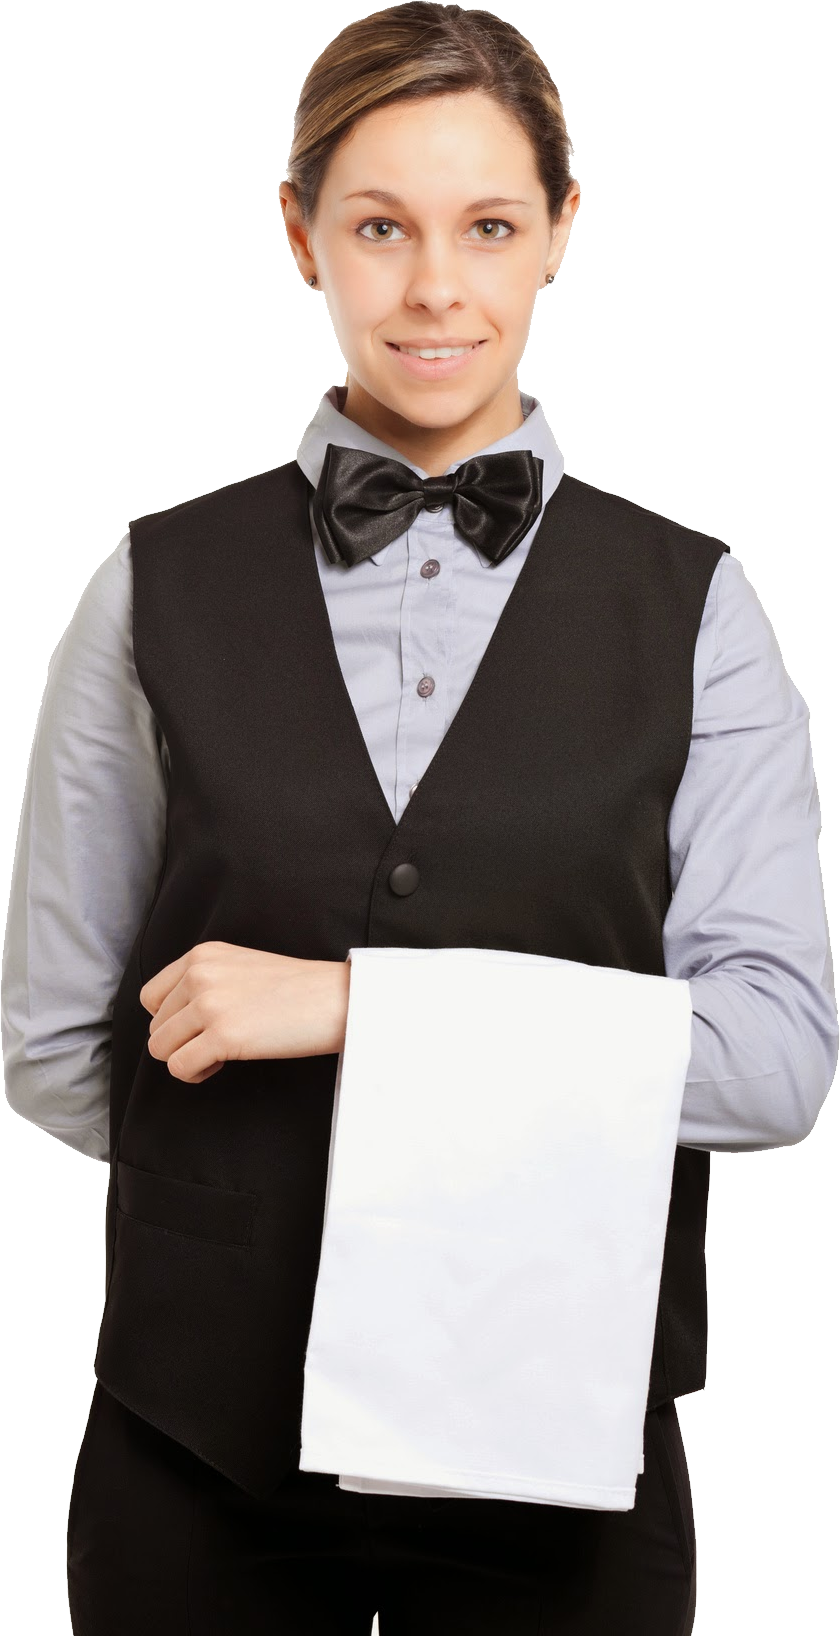 Waitress clipart male waiter. Png image purepng free